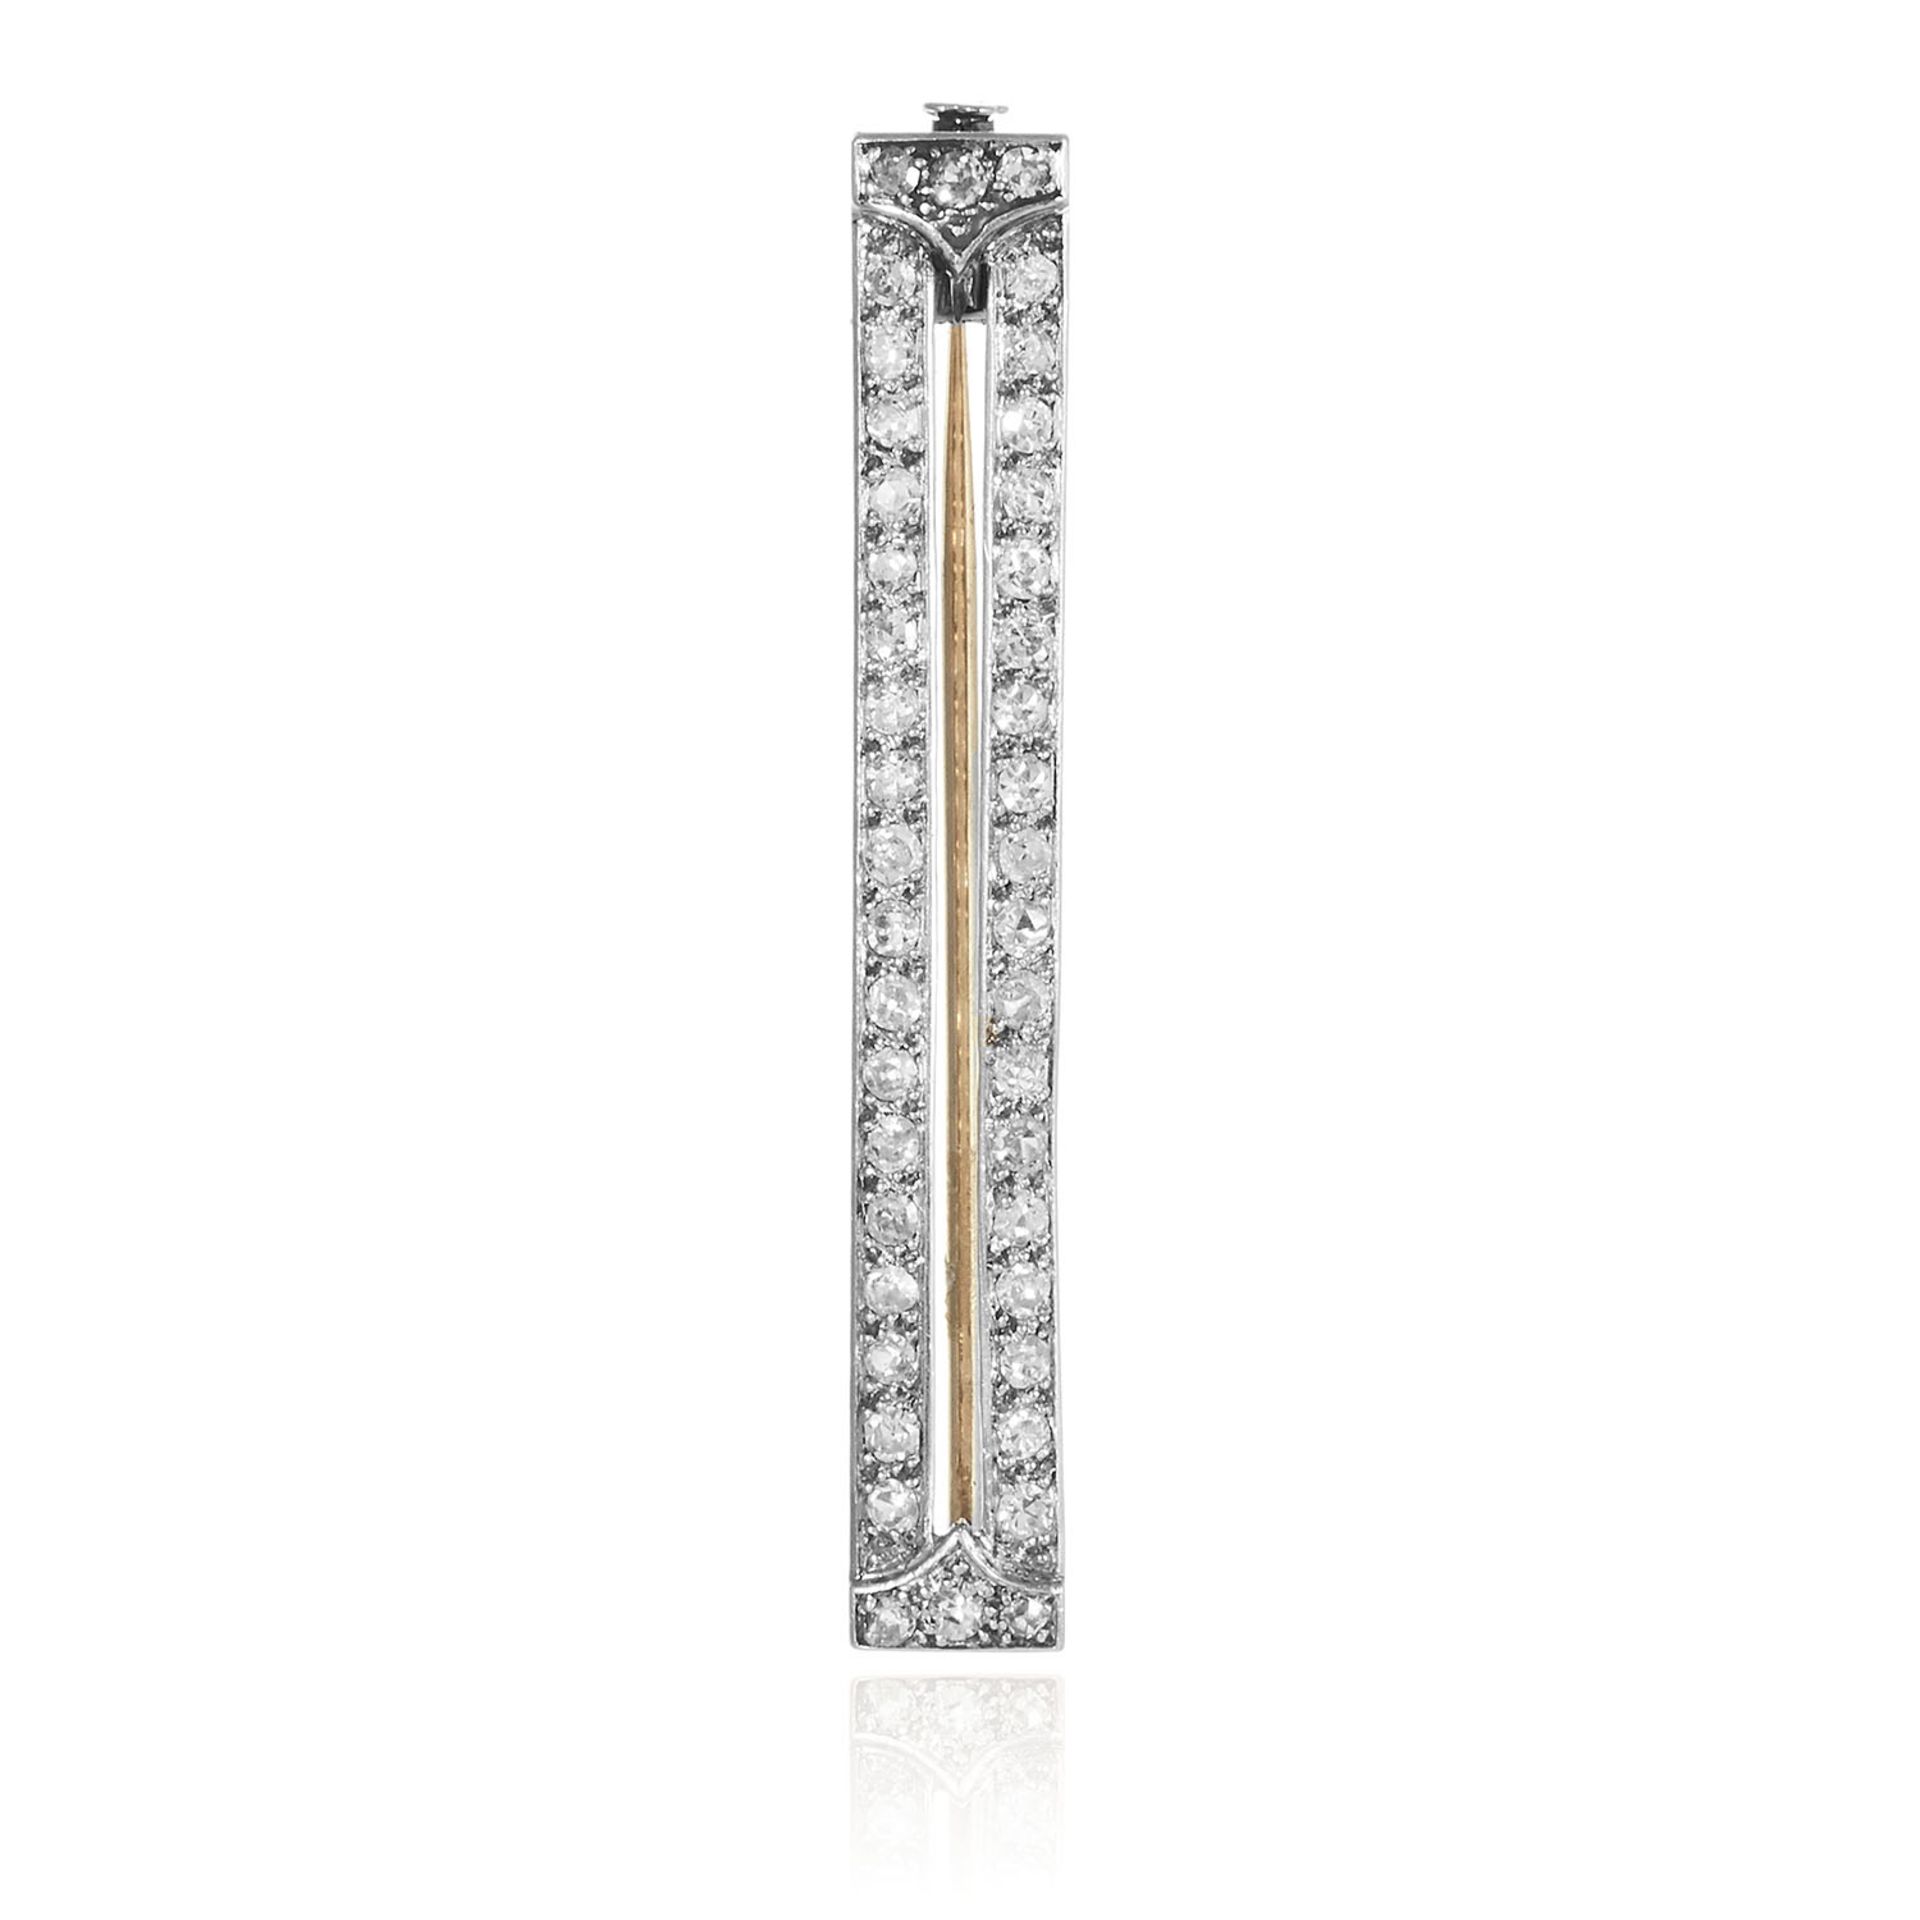 A DIAMOND BAR BROOCH in gold or platinum, designed as double row of round cut diamonds totalling